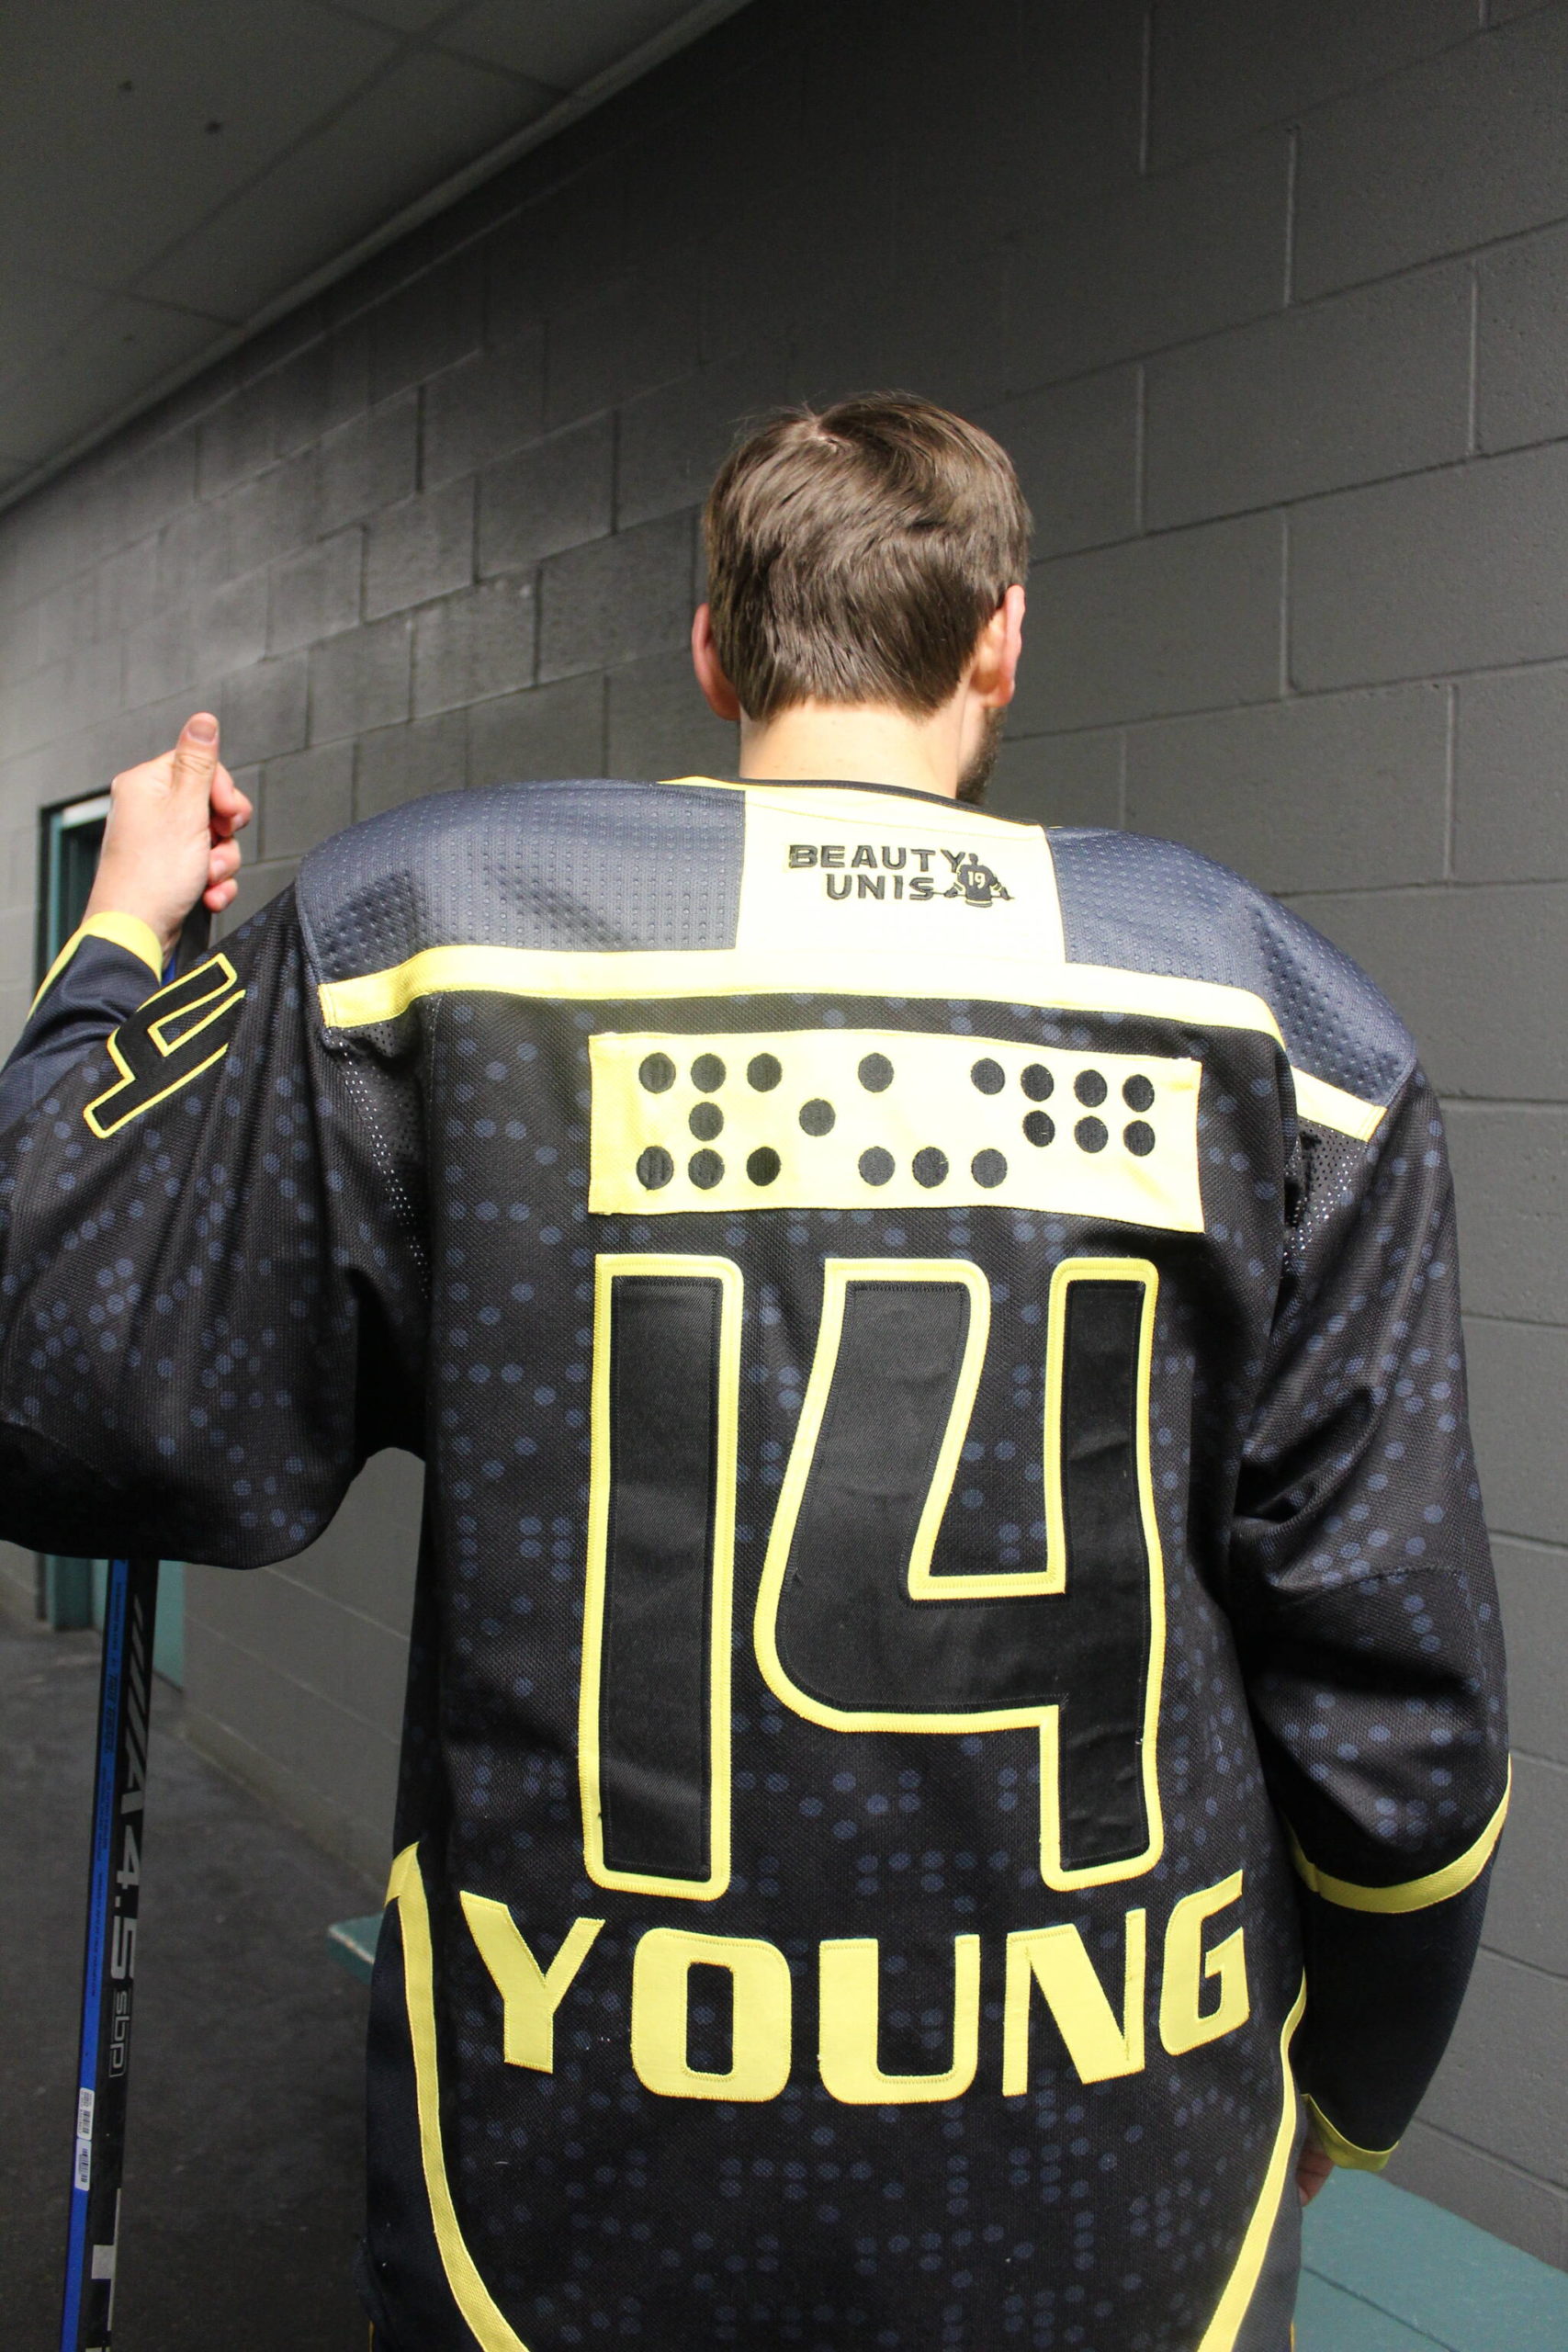 Adam Young’s hockey jersey spells out his name in braille. Photo by Bailey Jo Josie/Sound Publishing